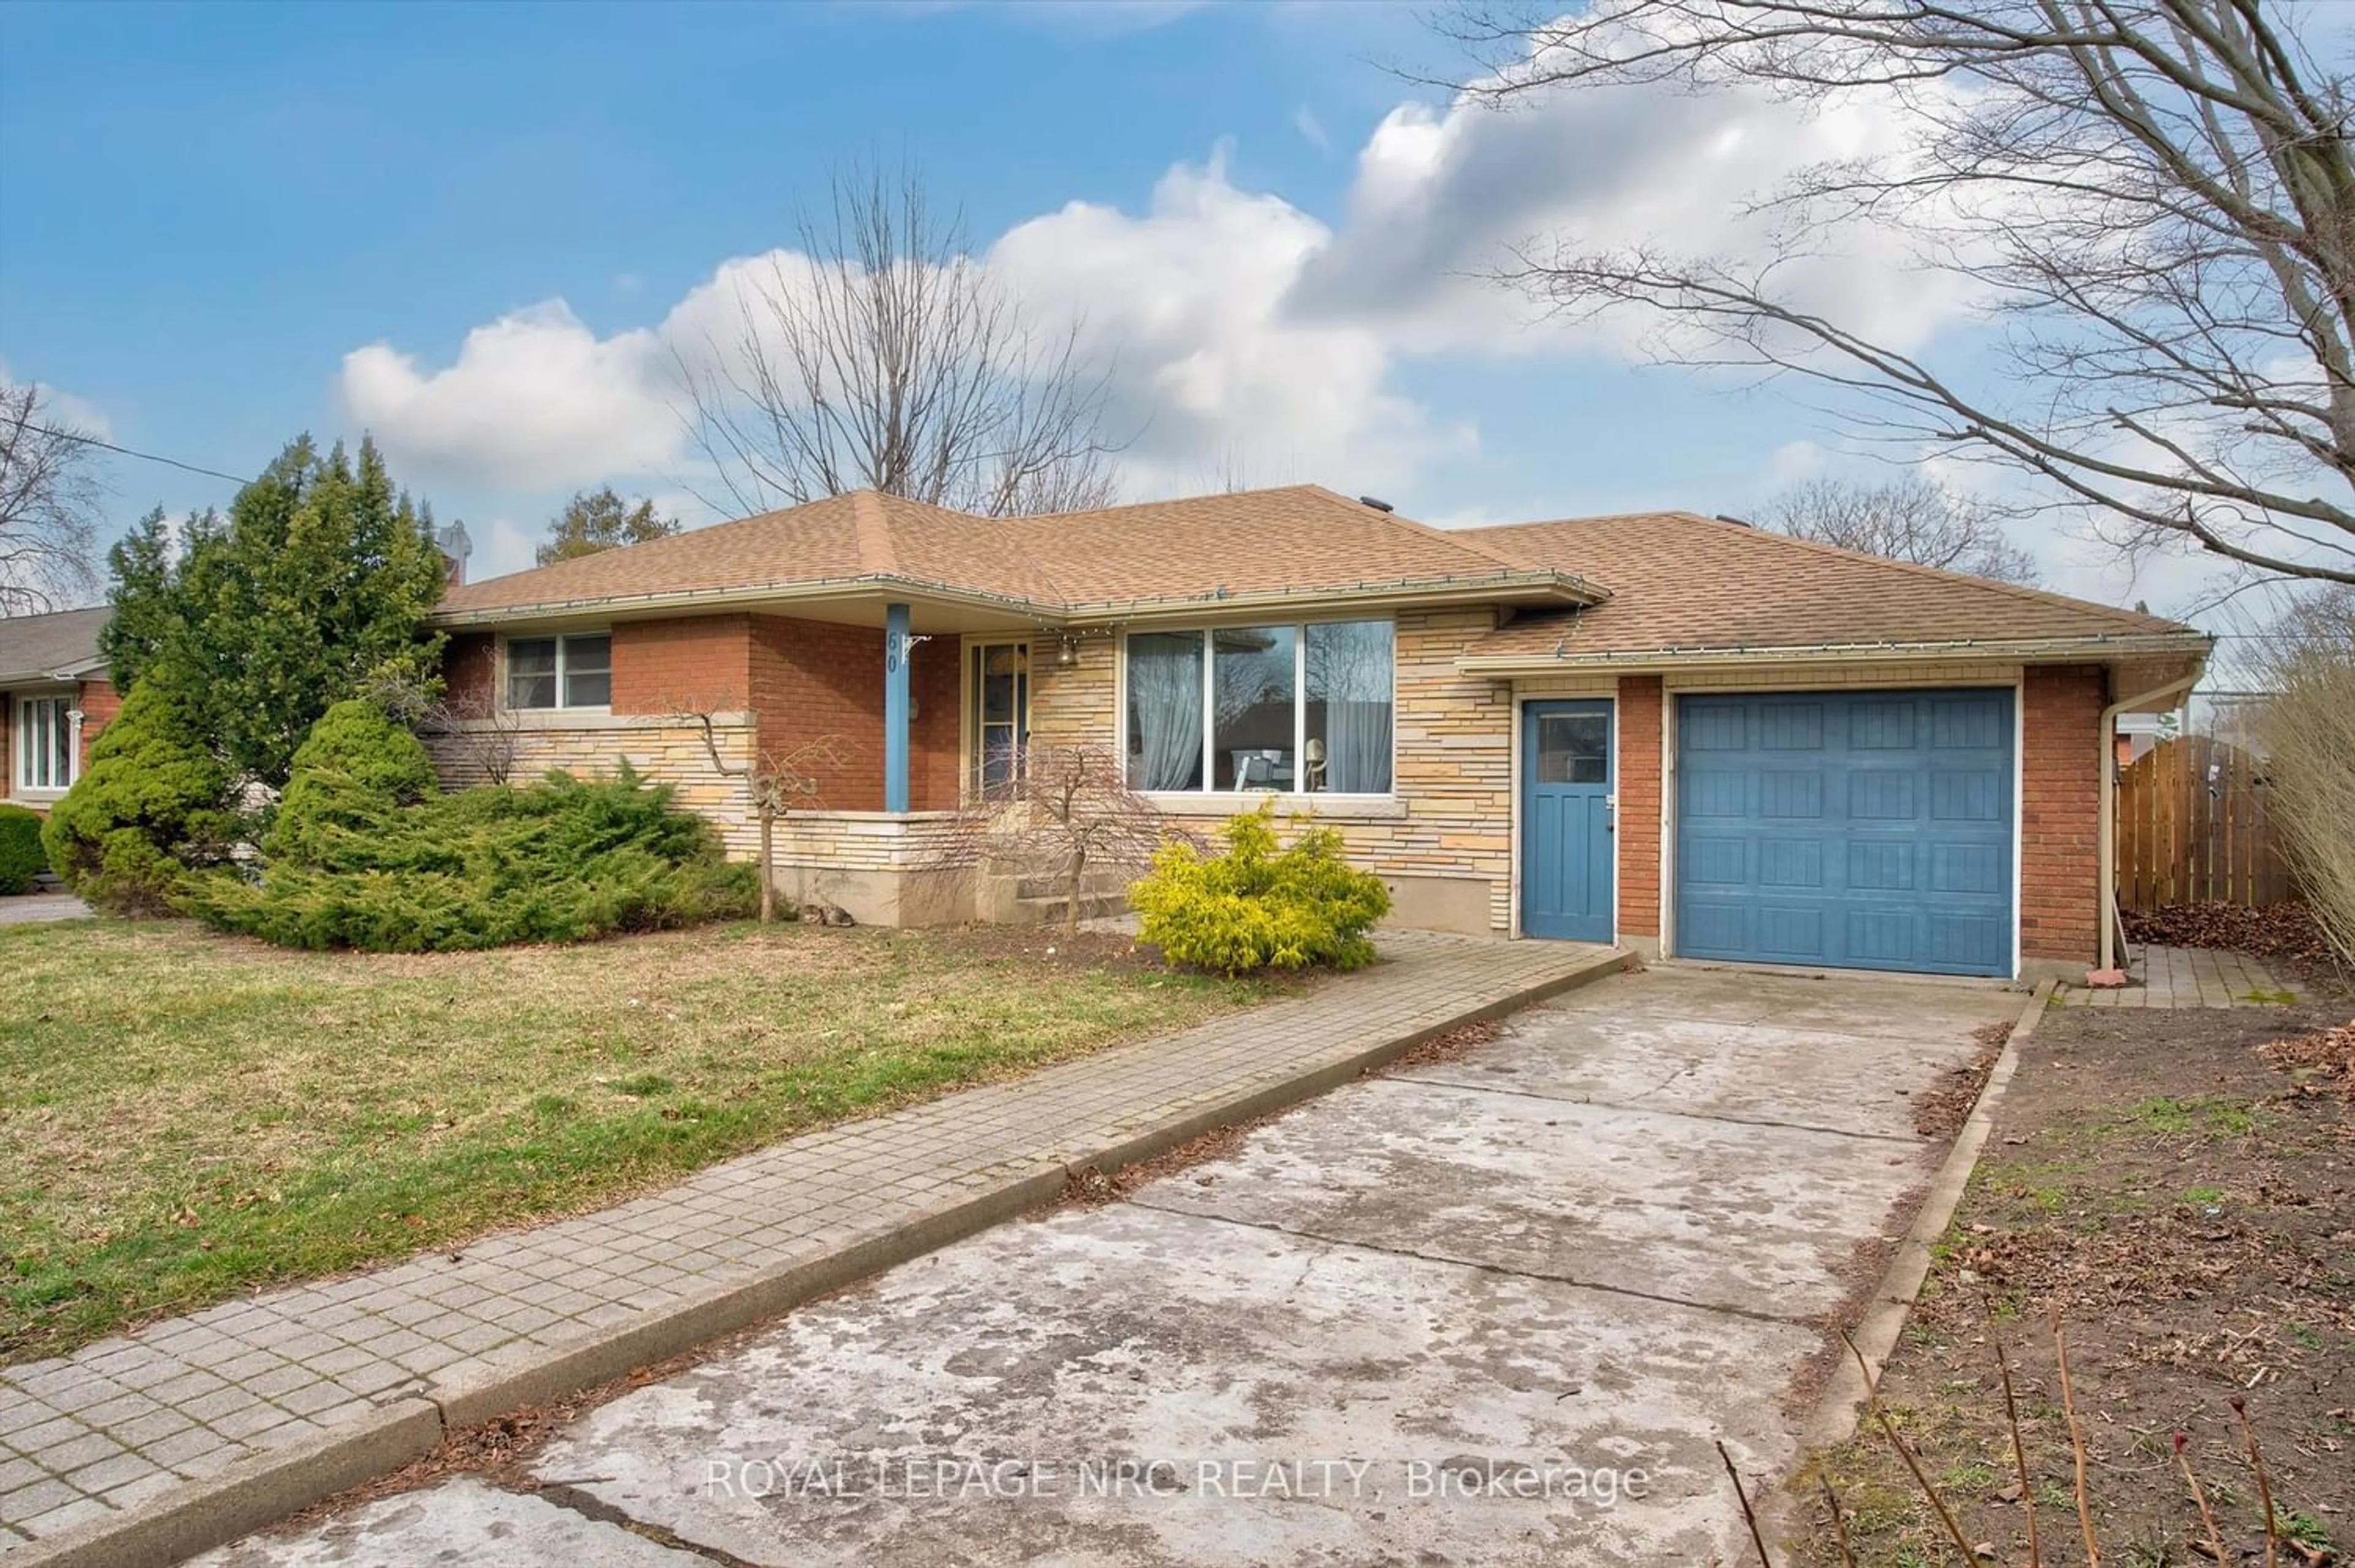 Home with brick exterior material for 60 Wakelin Terr, St. Catharines Ontario L2M 4K9